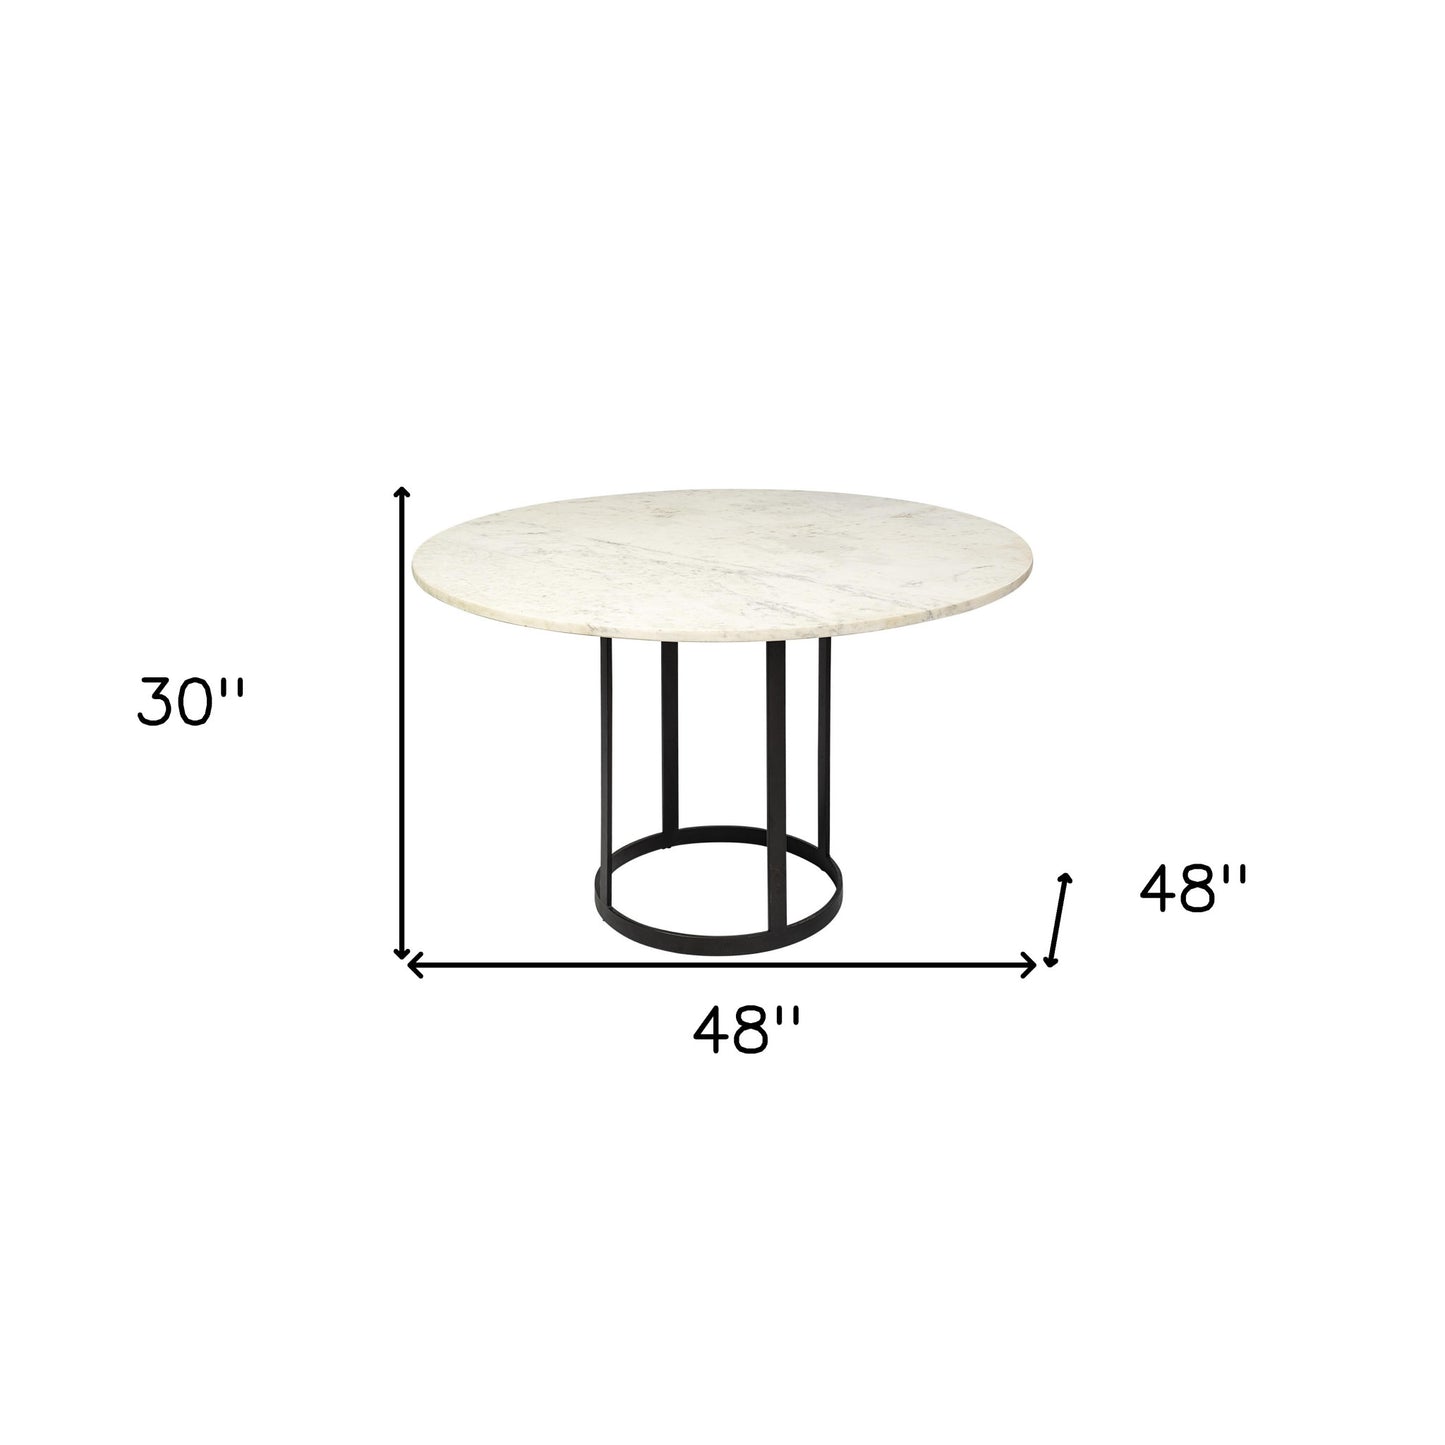 48" Round White Marble Top With Black Metal Base Dining Table